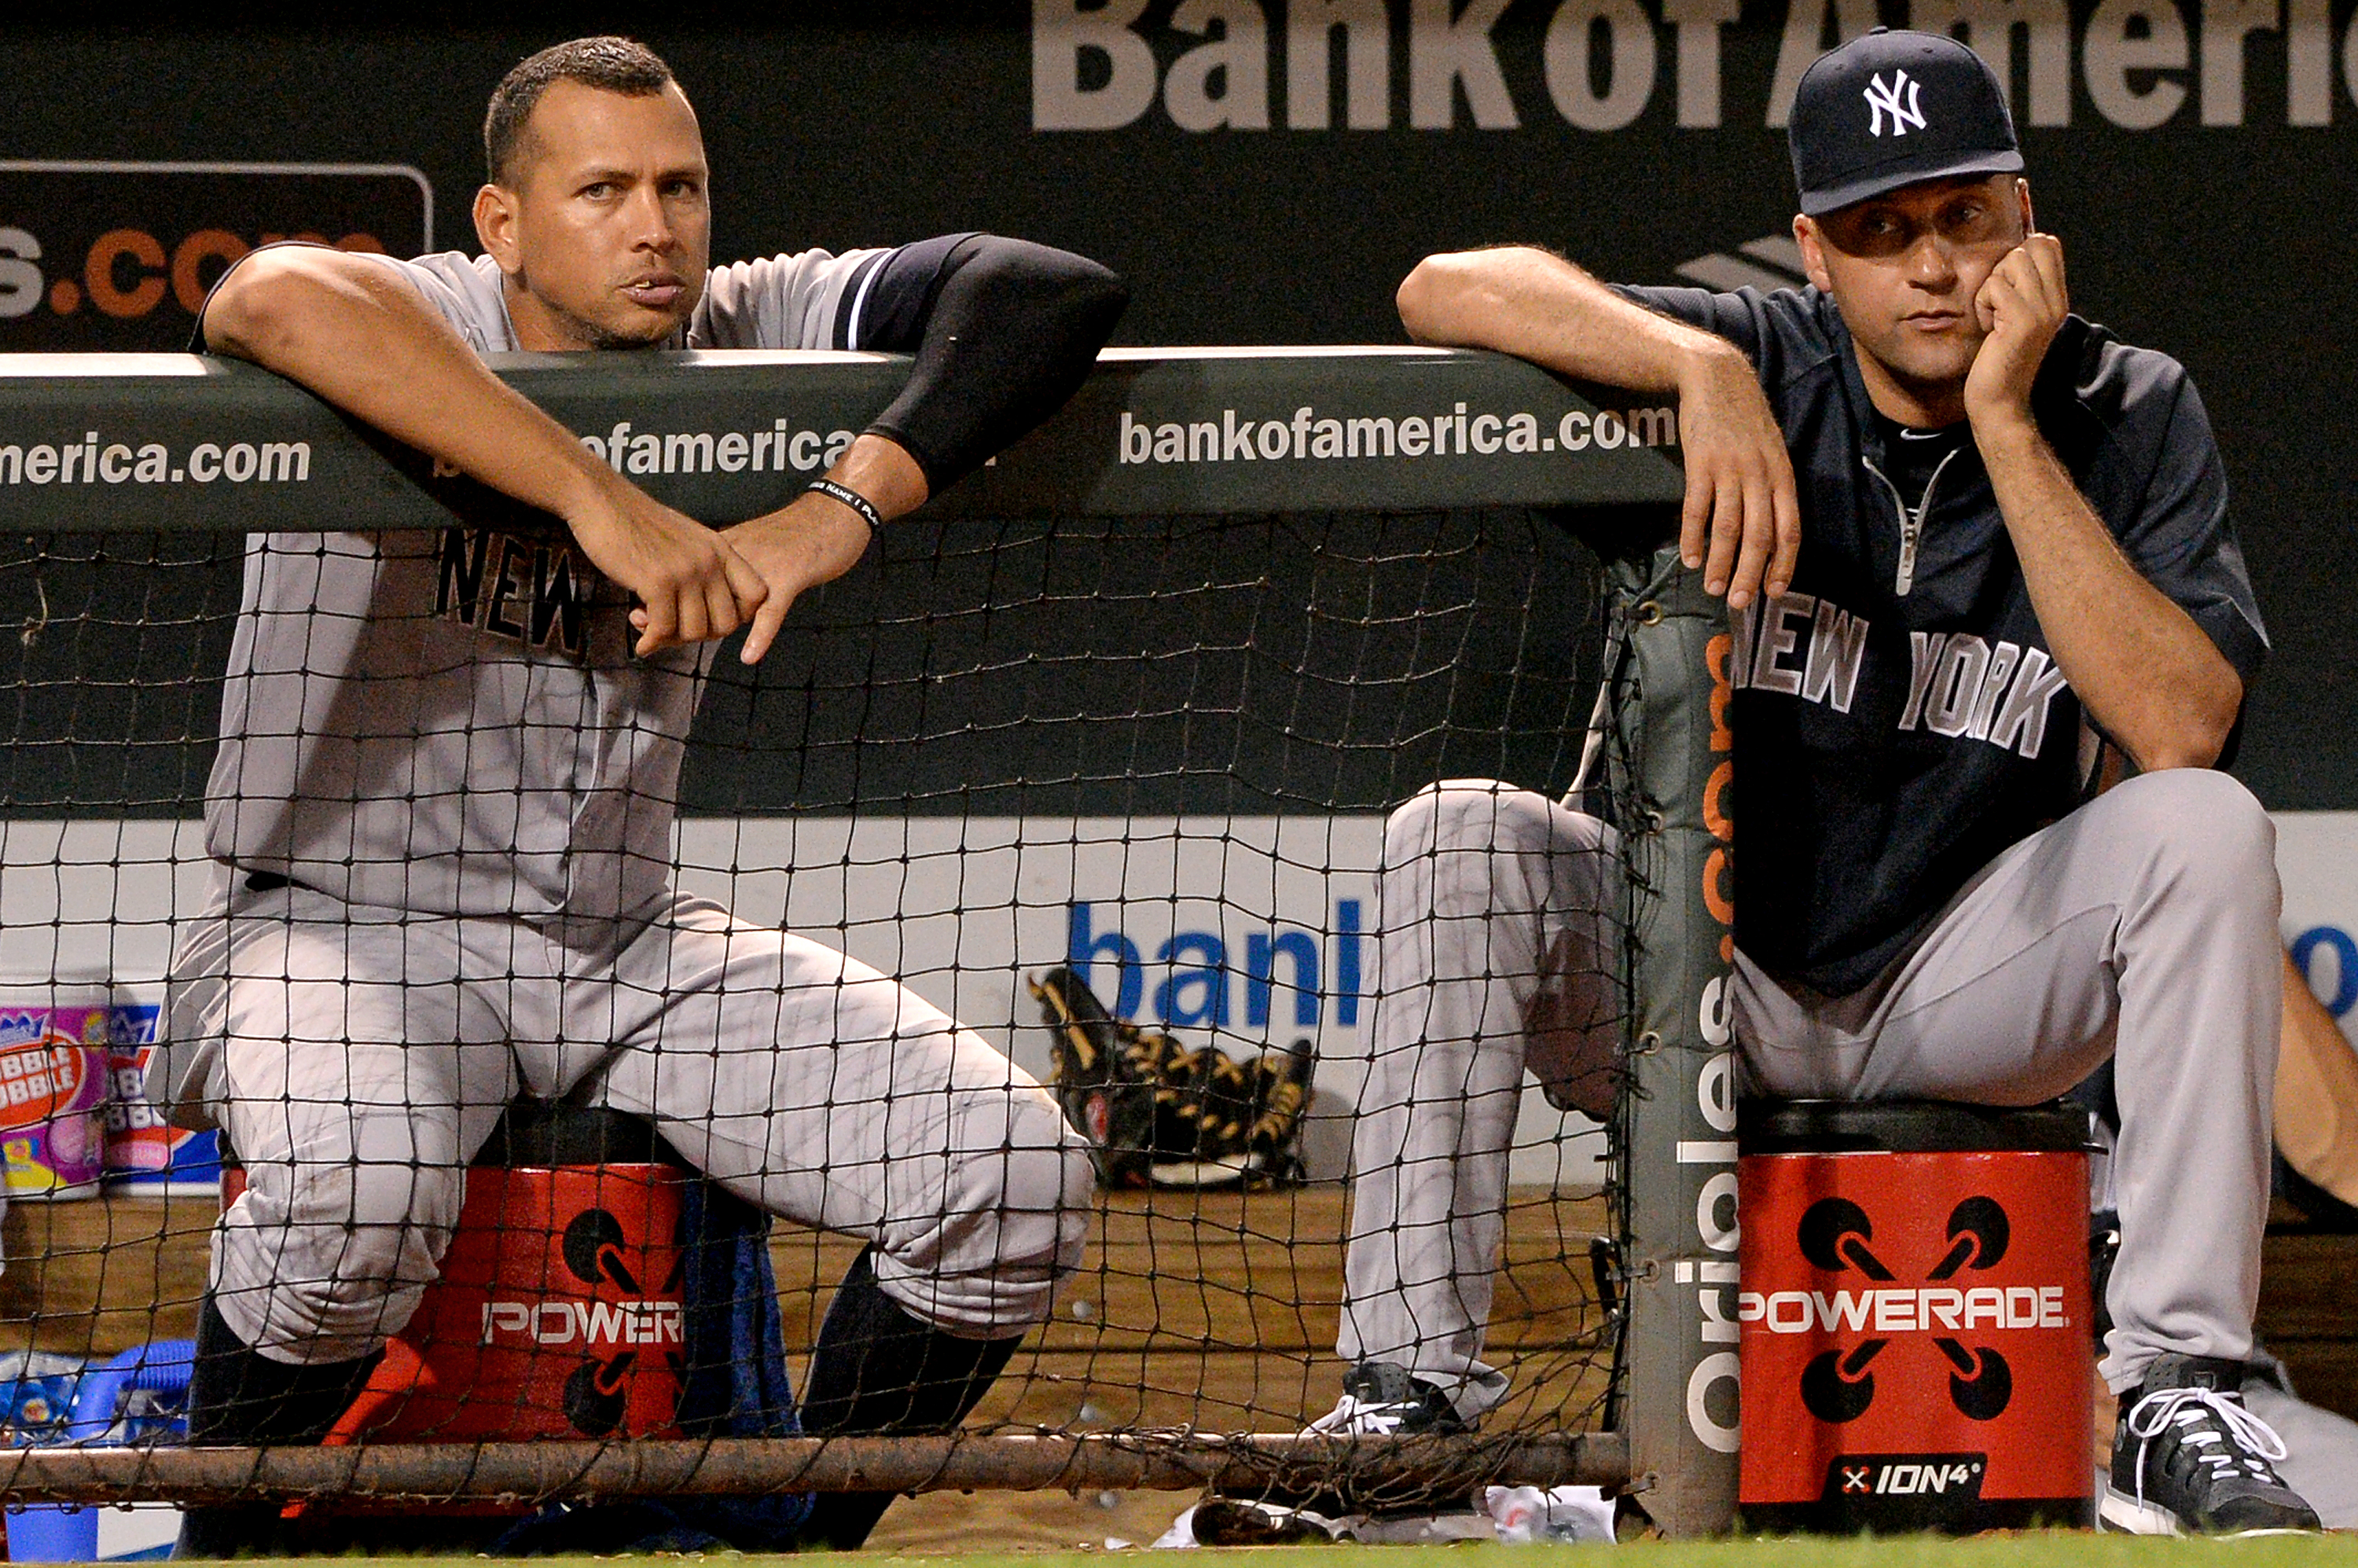 Report: A-Rod tested positive for steroids